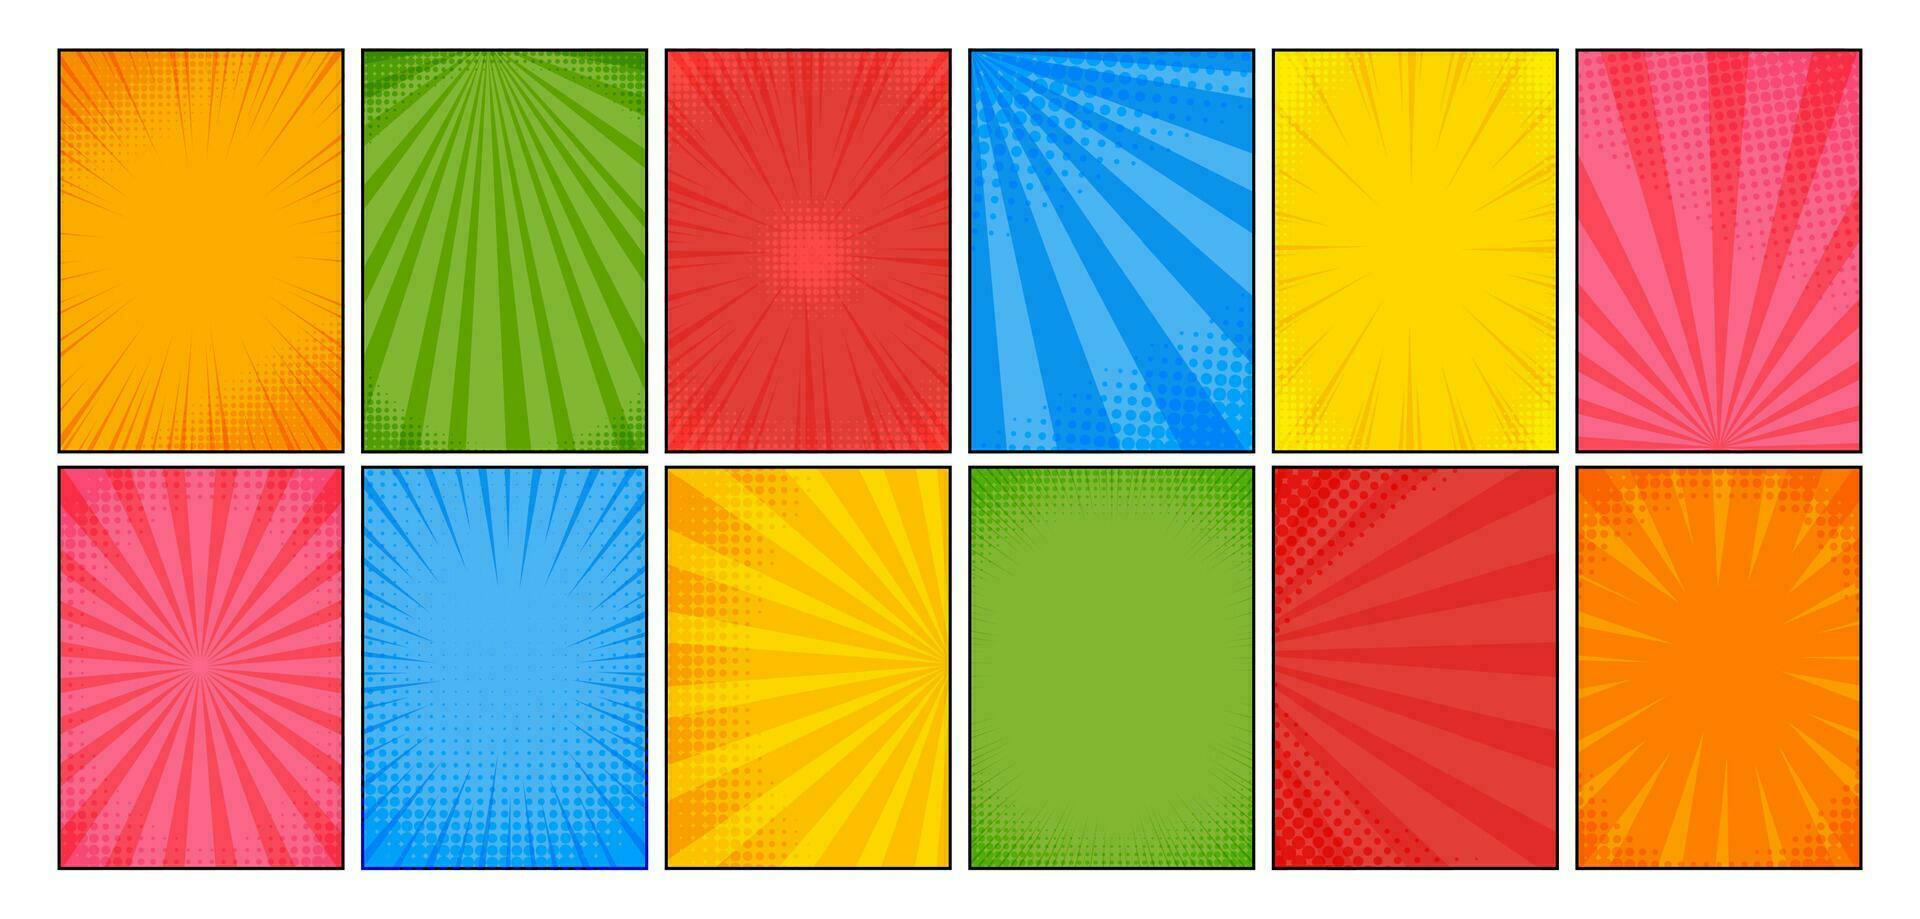 Comic book background. Pop art style texture with halftone dots and sunshine rays. Vintage cartoon magazine pattern. Superhero frame, spots and stripes elements. Vector set